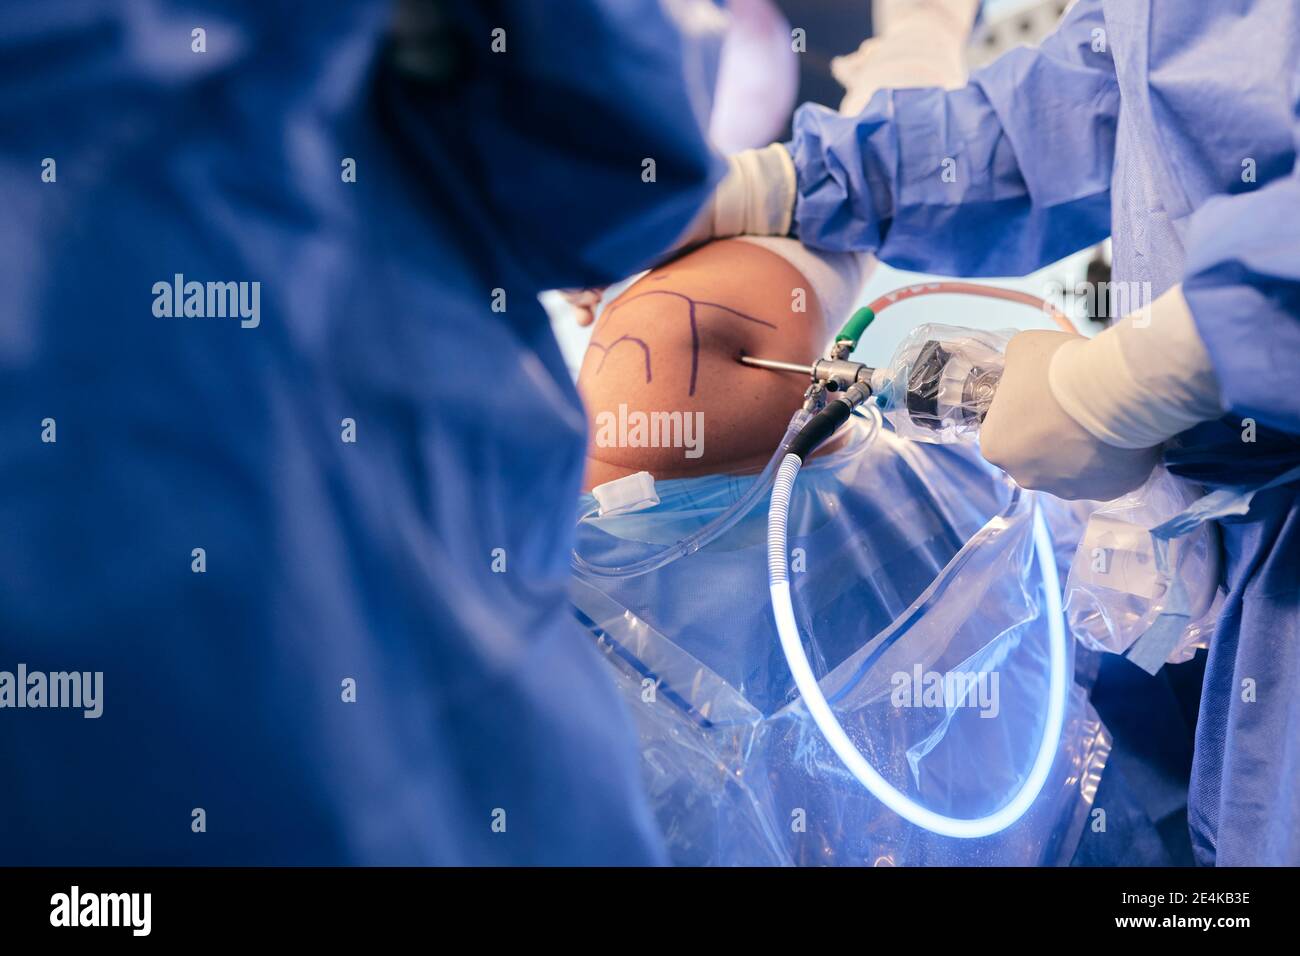 Doctors inserting endoscopy equipment while operating at operation room Stock Photo